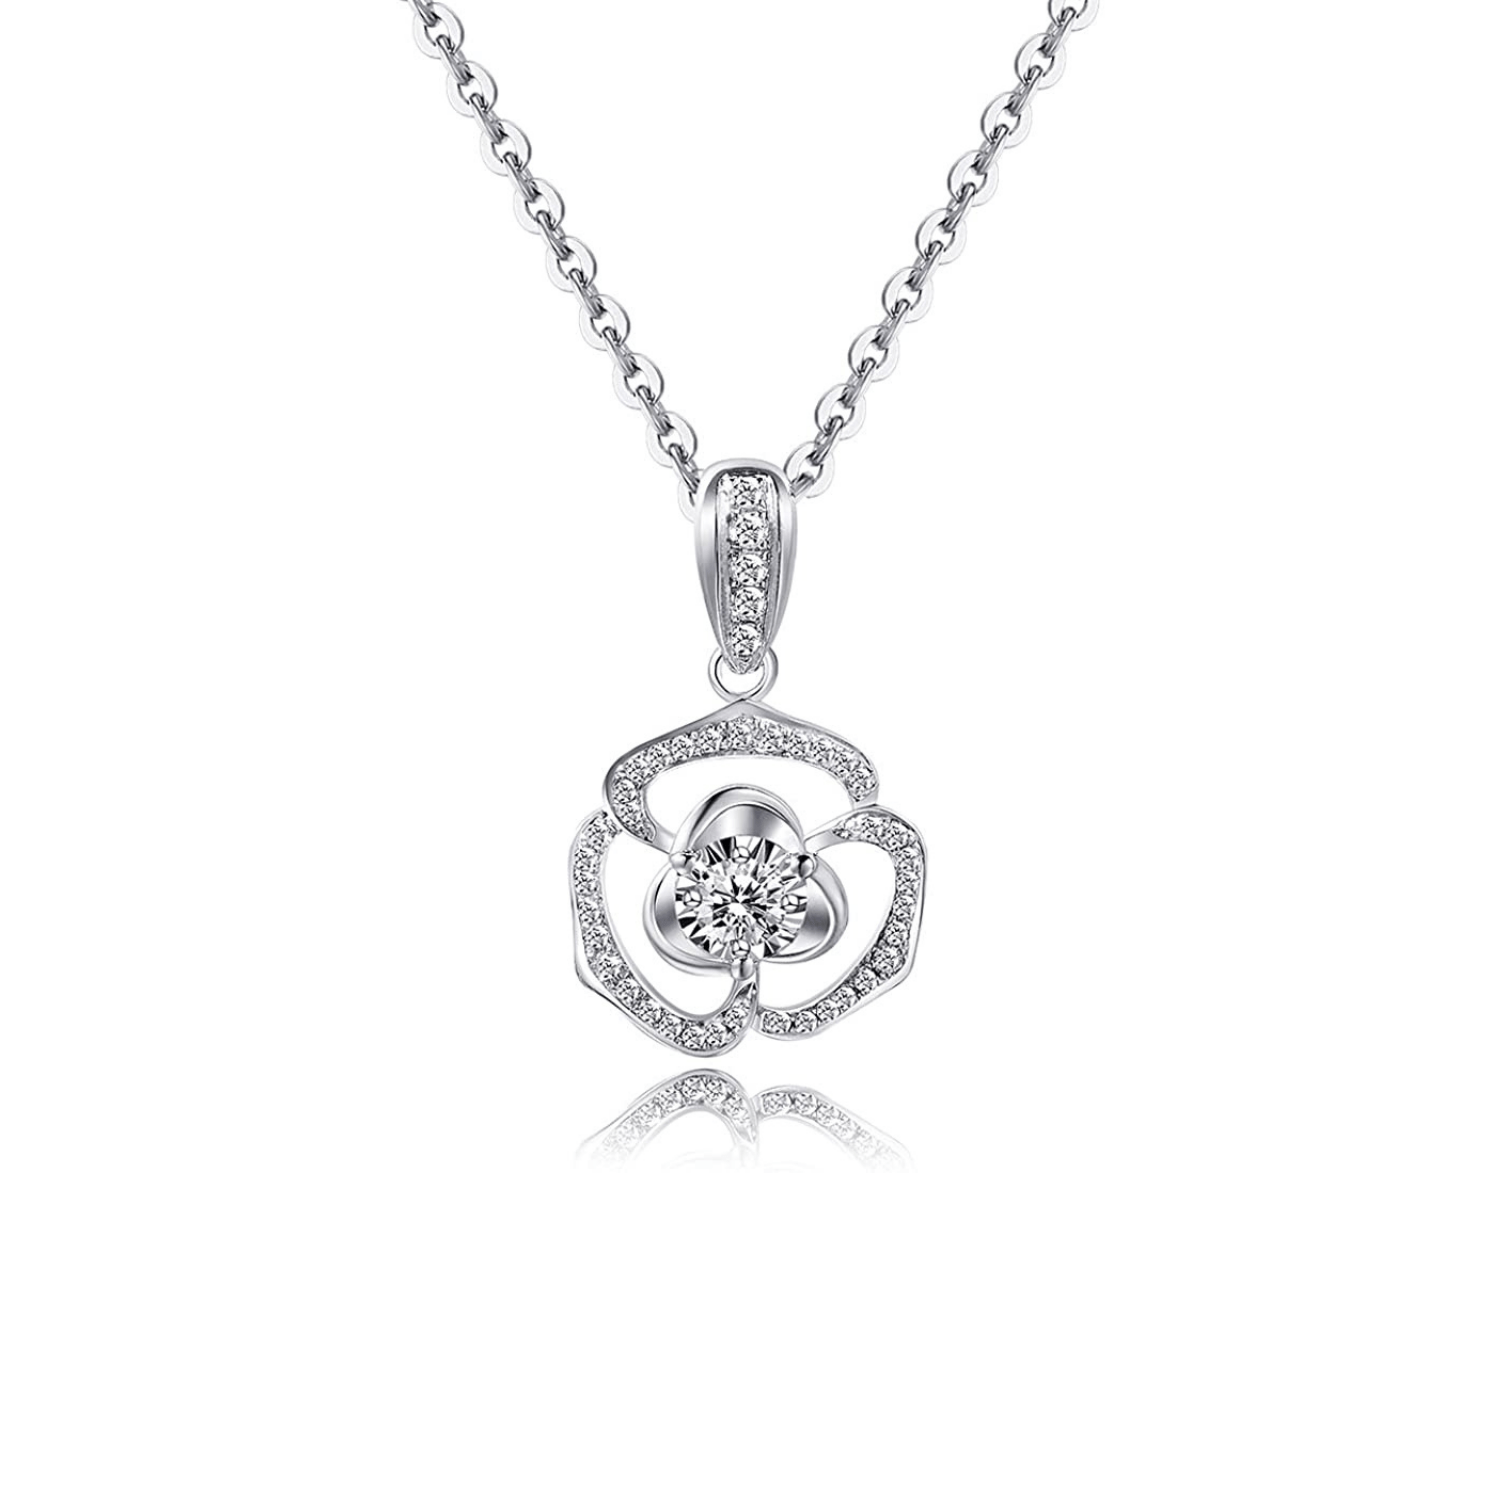 FANCIME "White Blossom" Flower Solitaire 18K White Gold Necklace Main